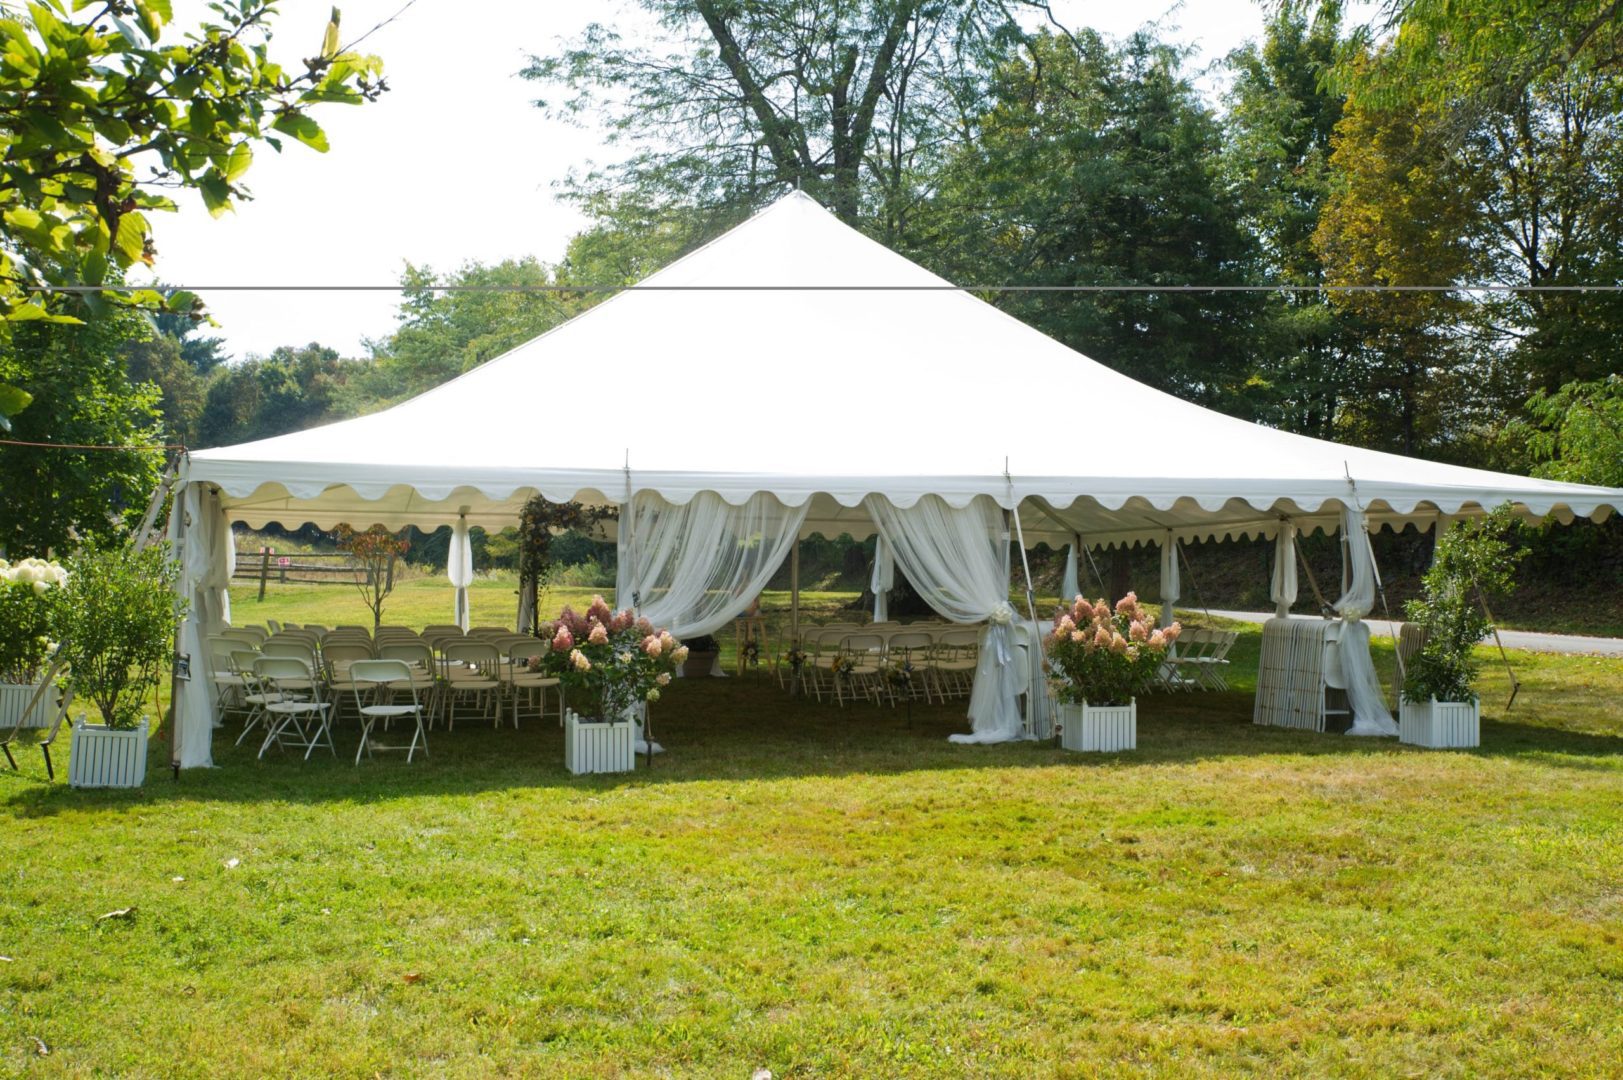 Rent a tent for an outdoor event!